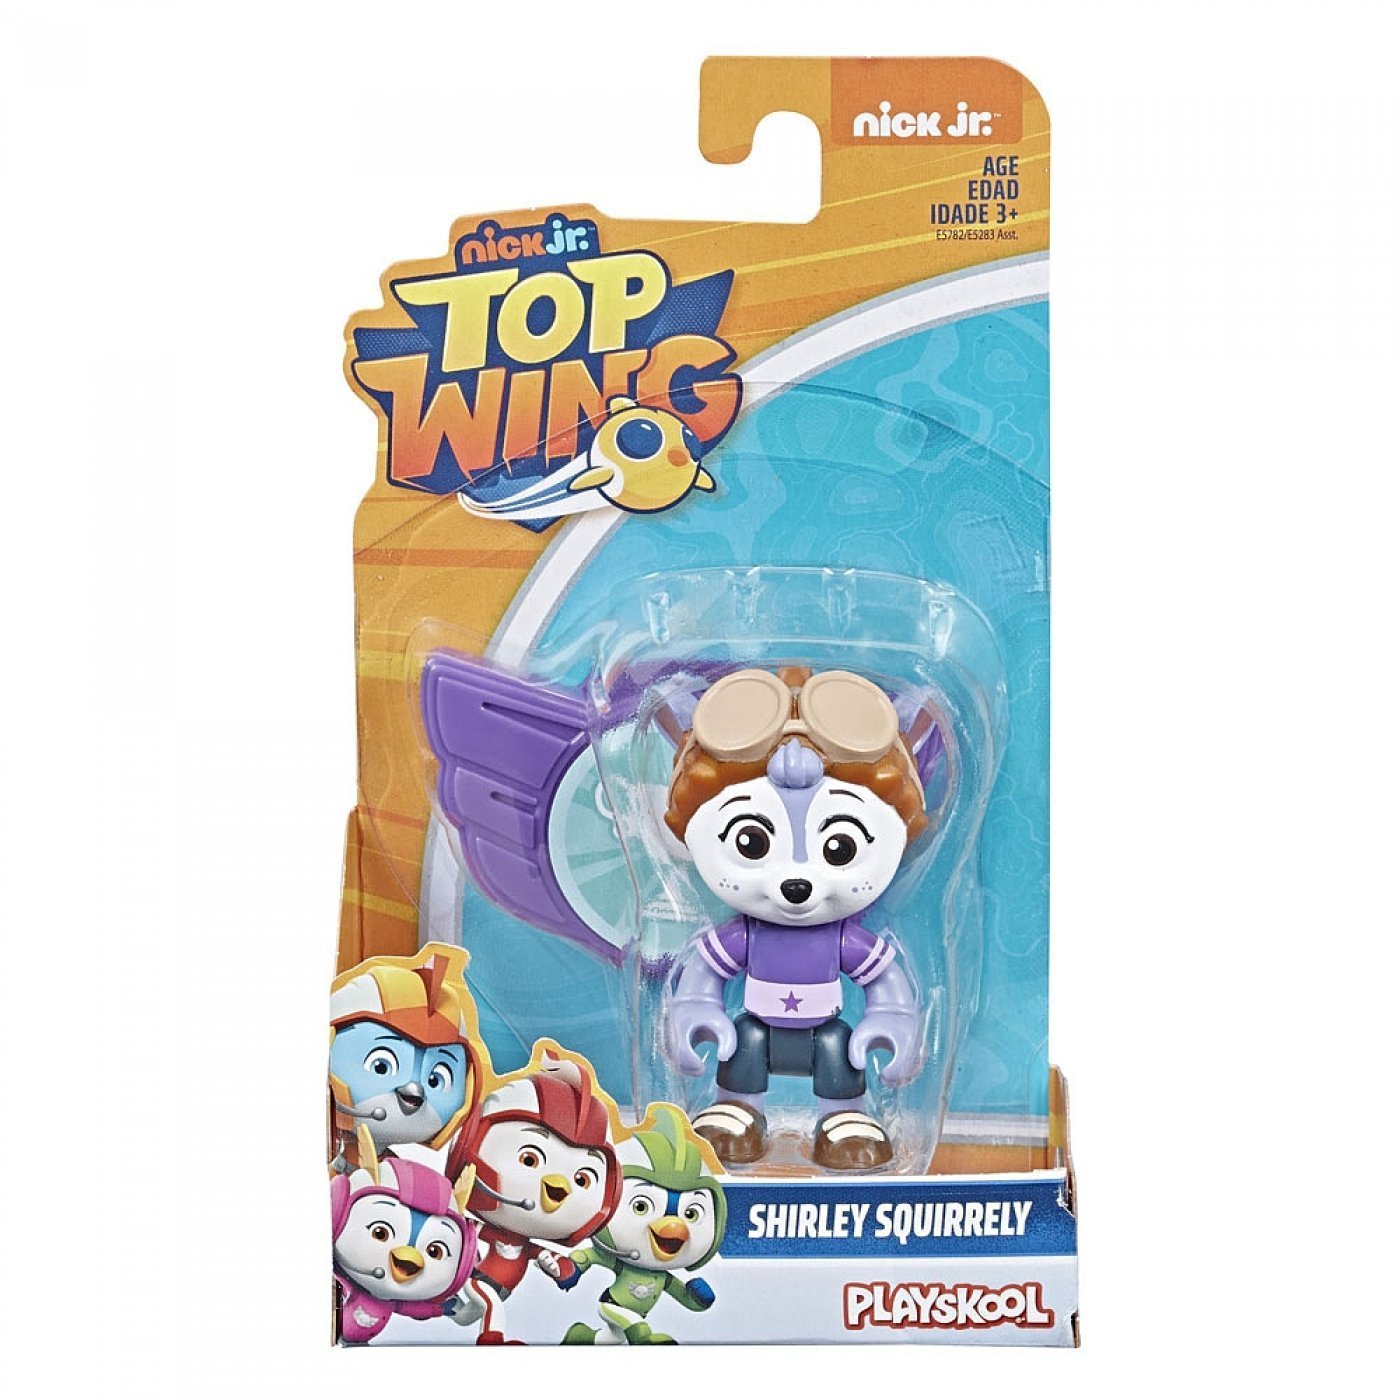 Top Wing - Shirley Squirrely